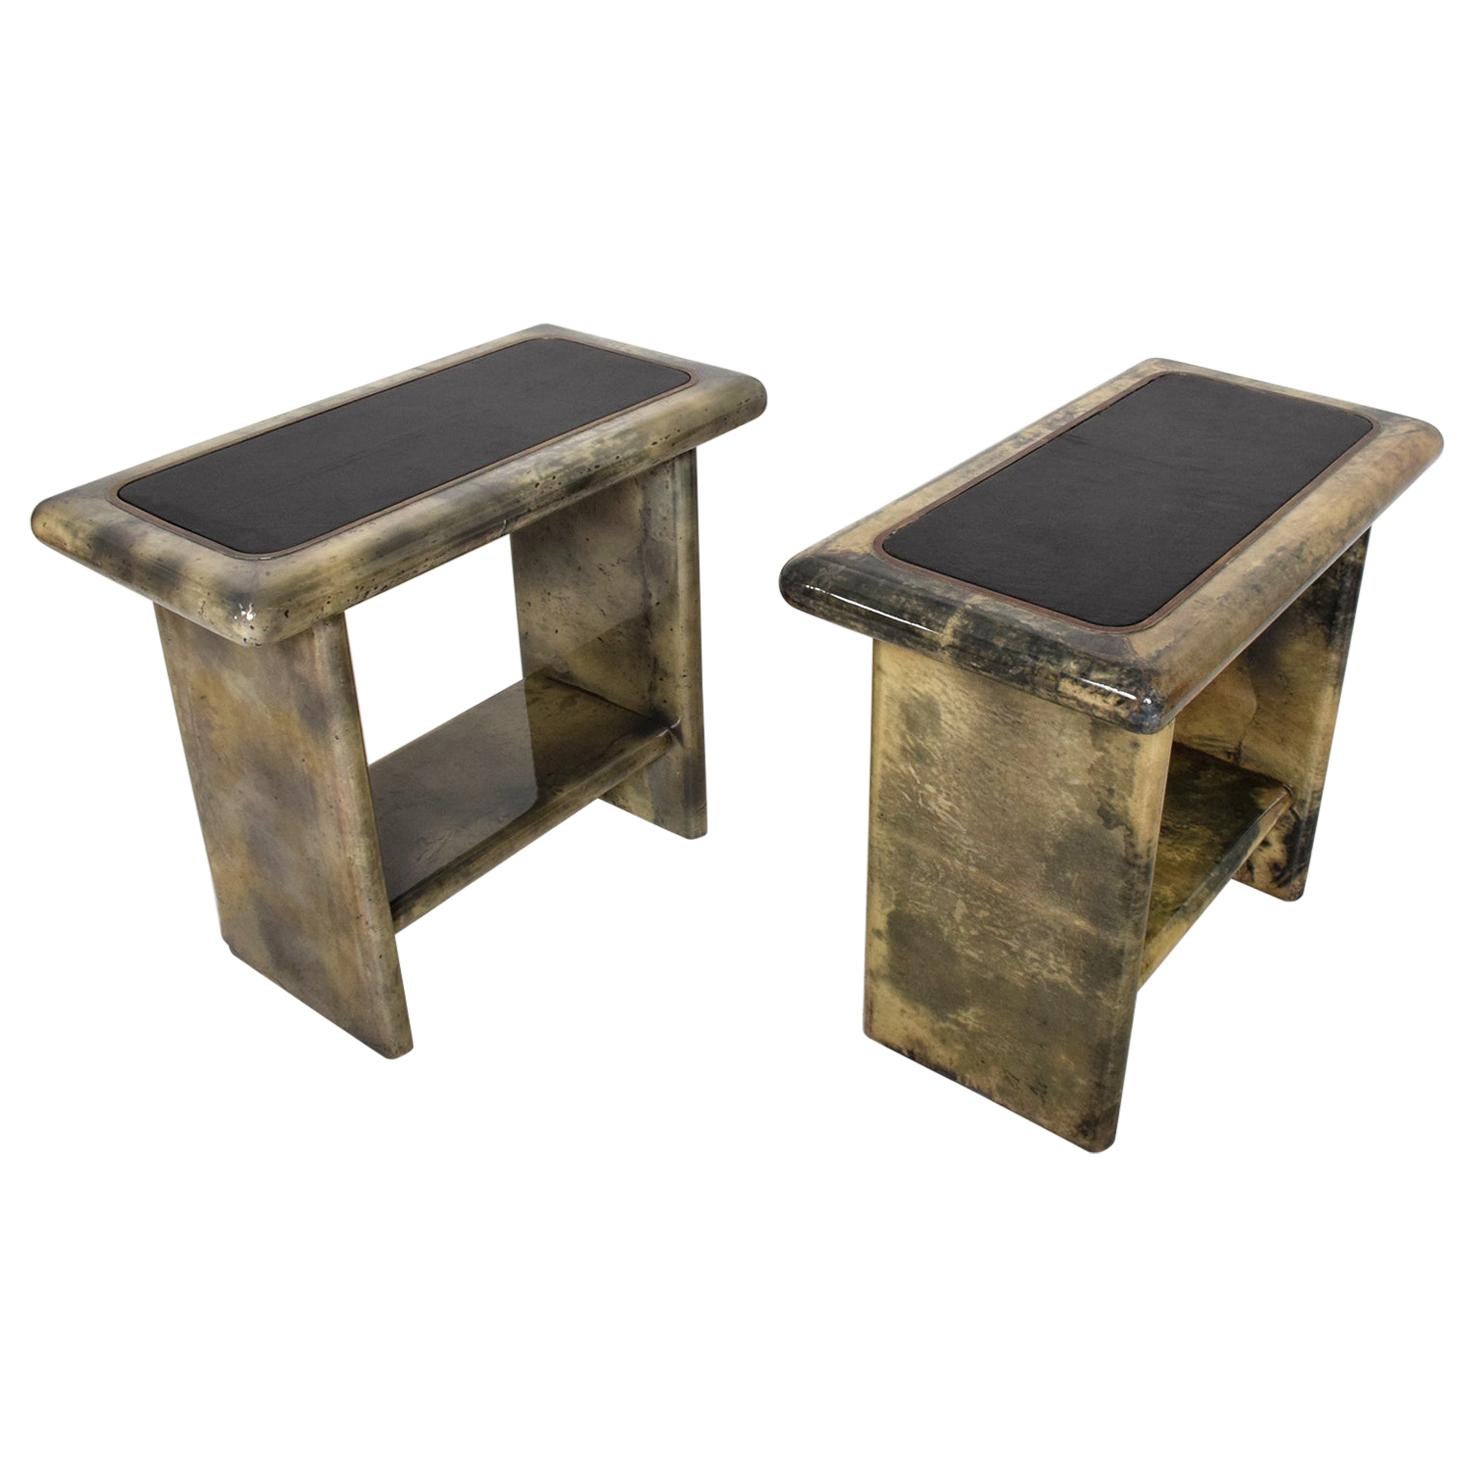 1960s Arturo Pani Side Tables Lacquered Goatskin Leather For Sale 4